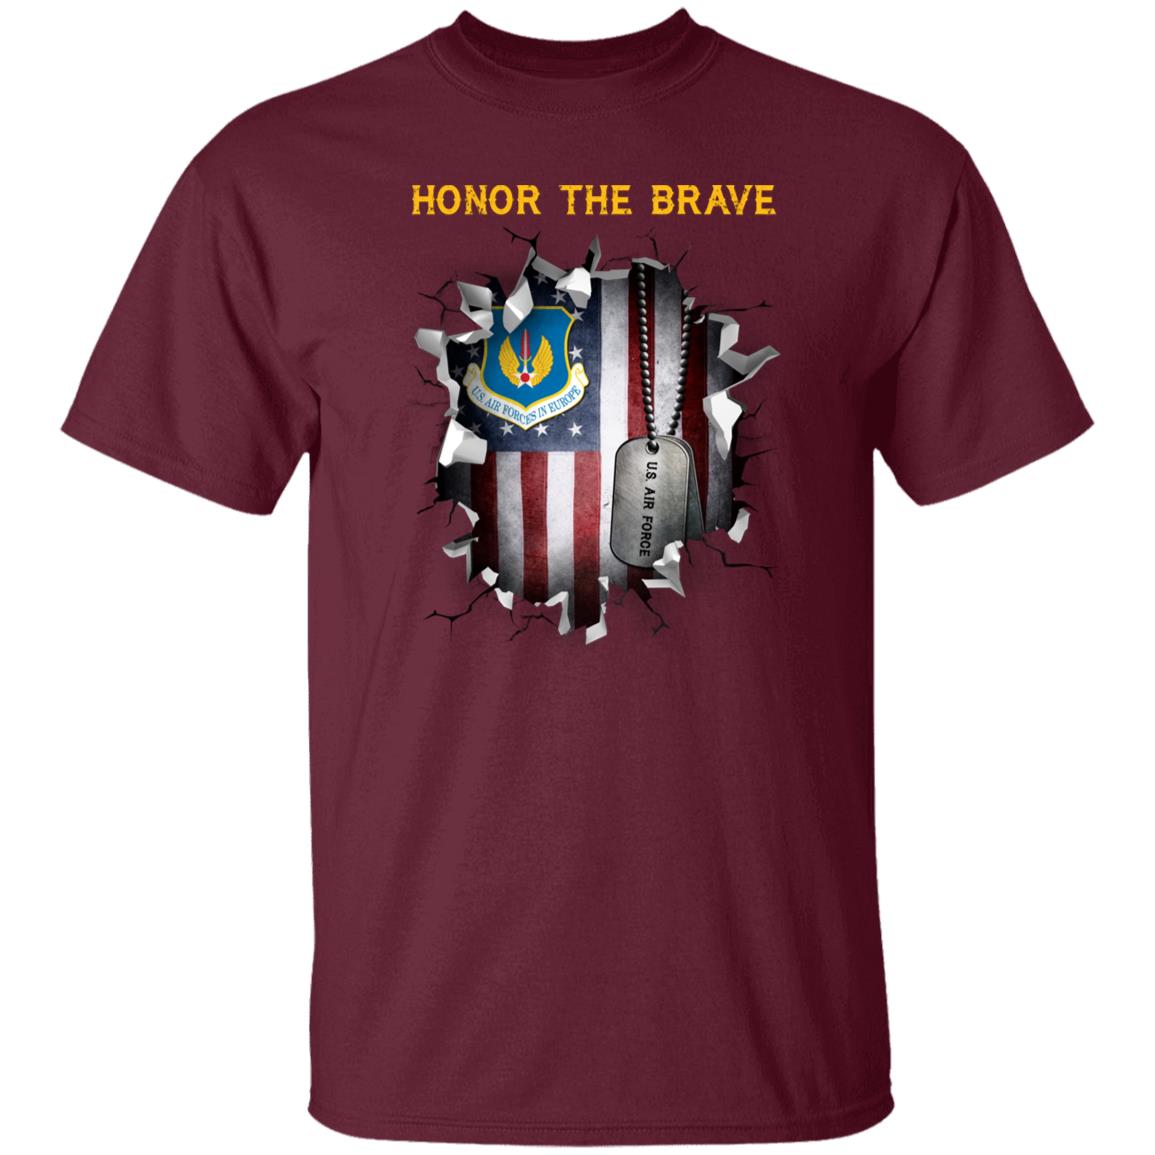 US Air Force in Europe - Honor The Brave Front Shirt